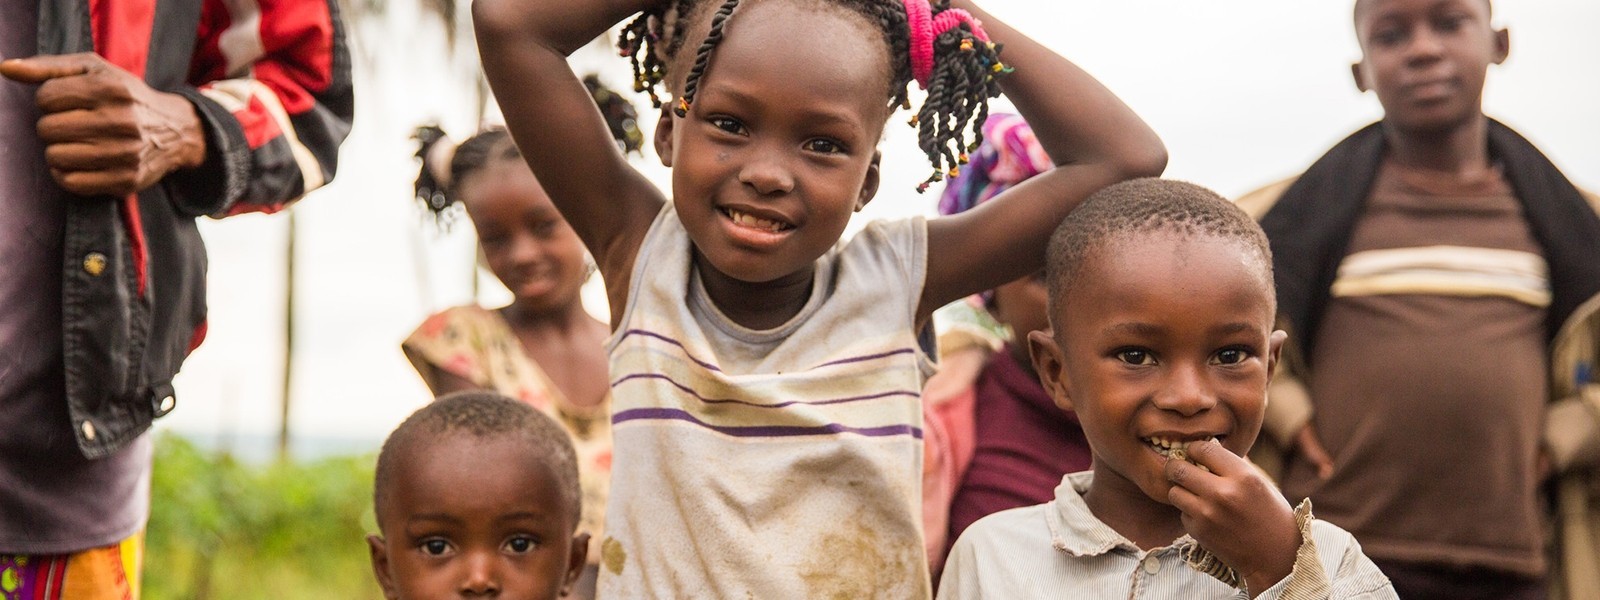 Thank you for helping children in the Congo | Lutheran World Relief